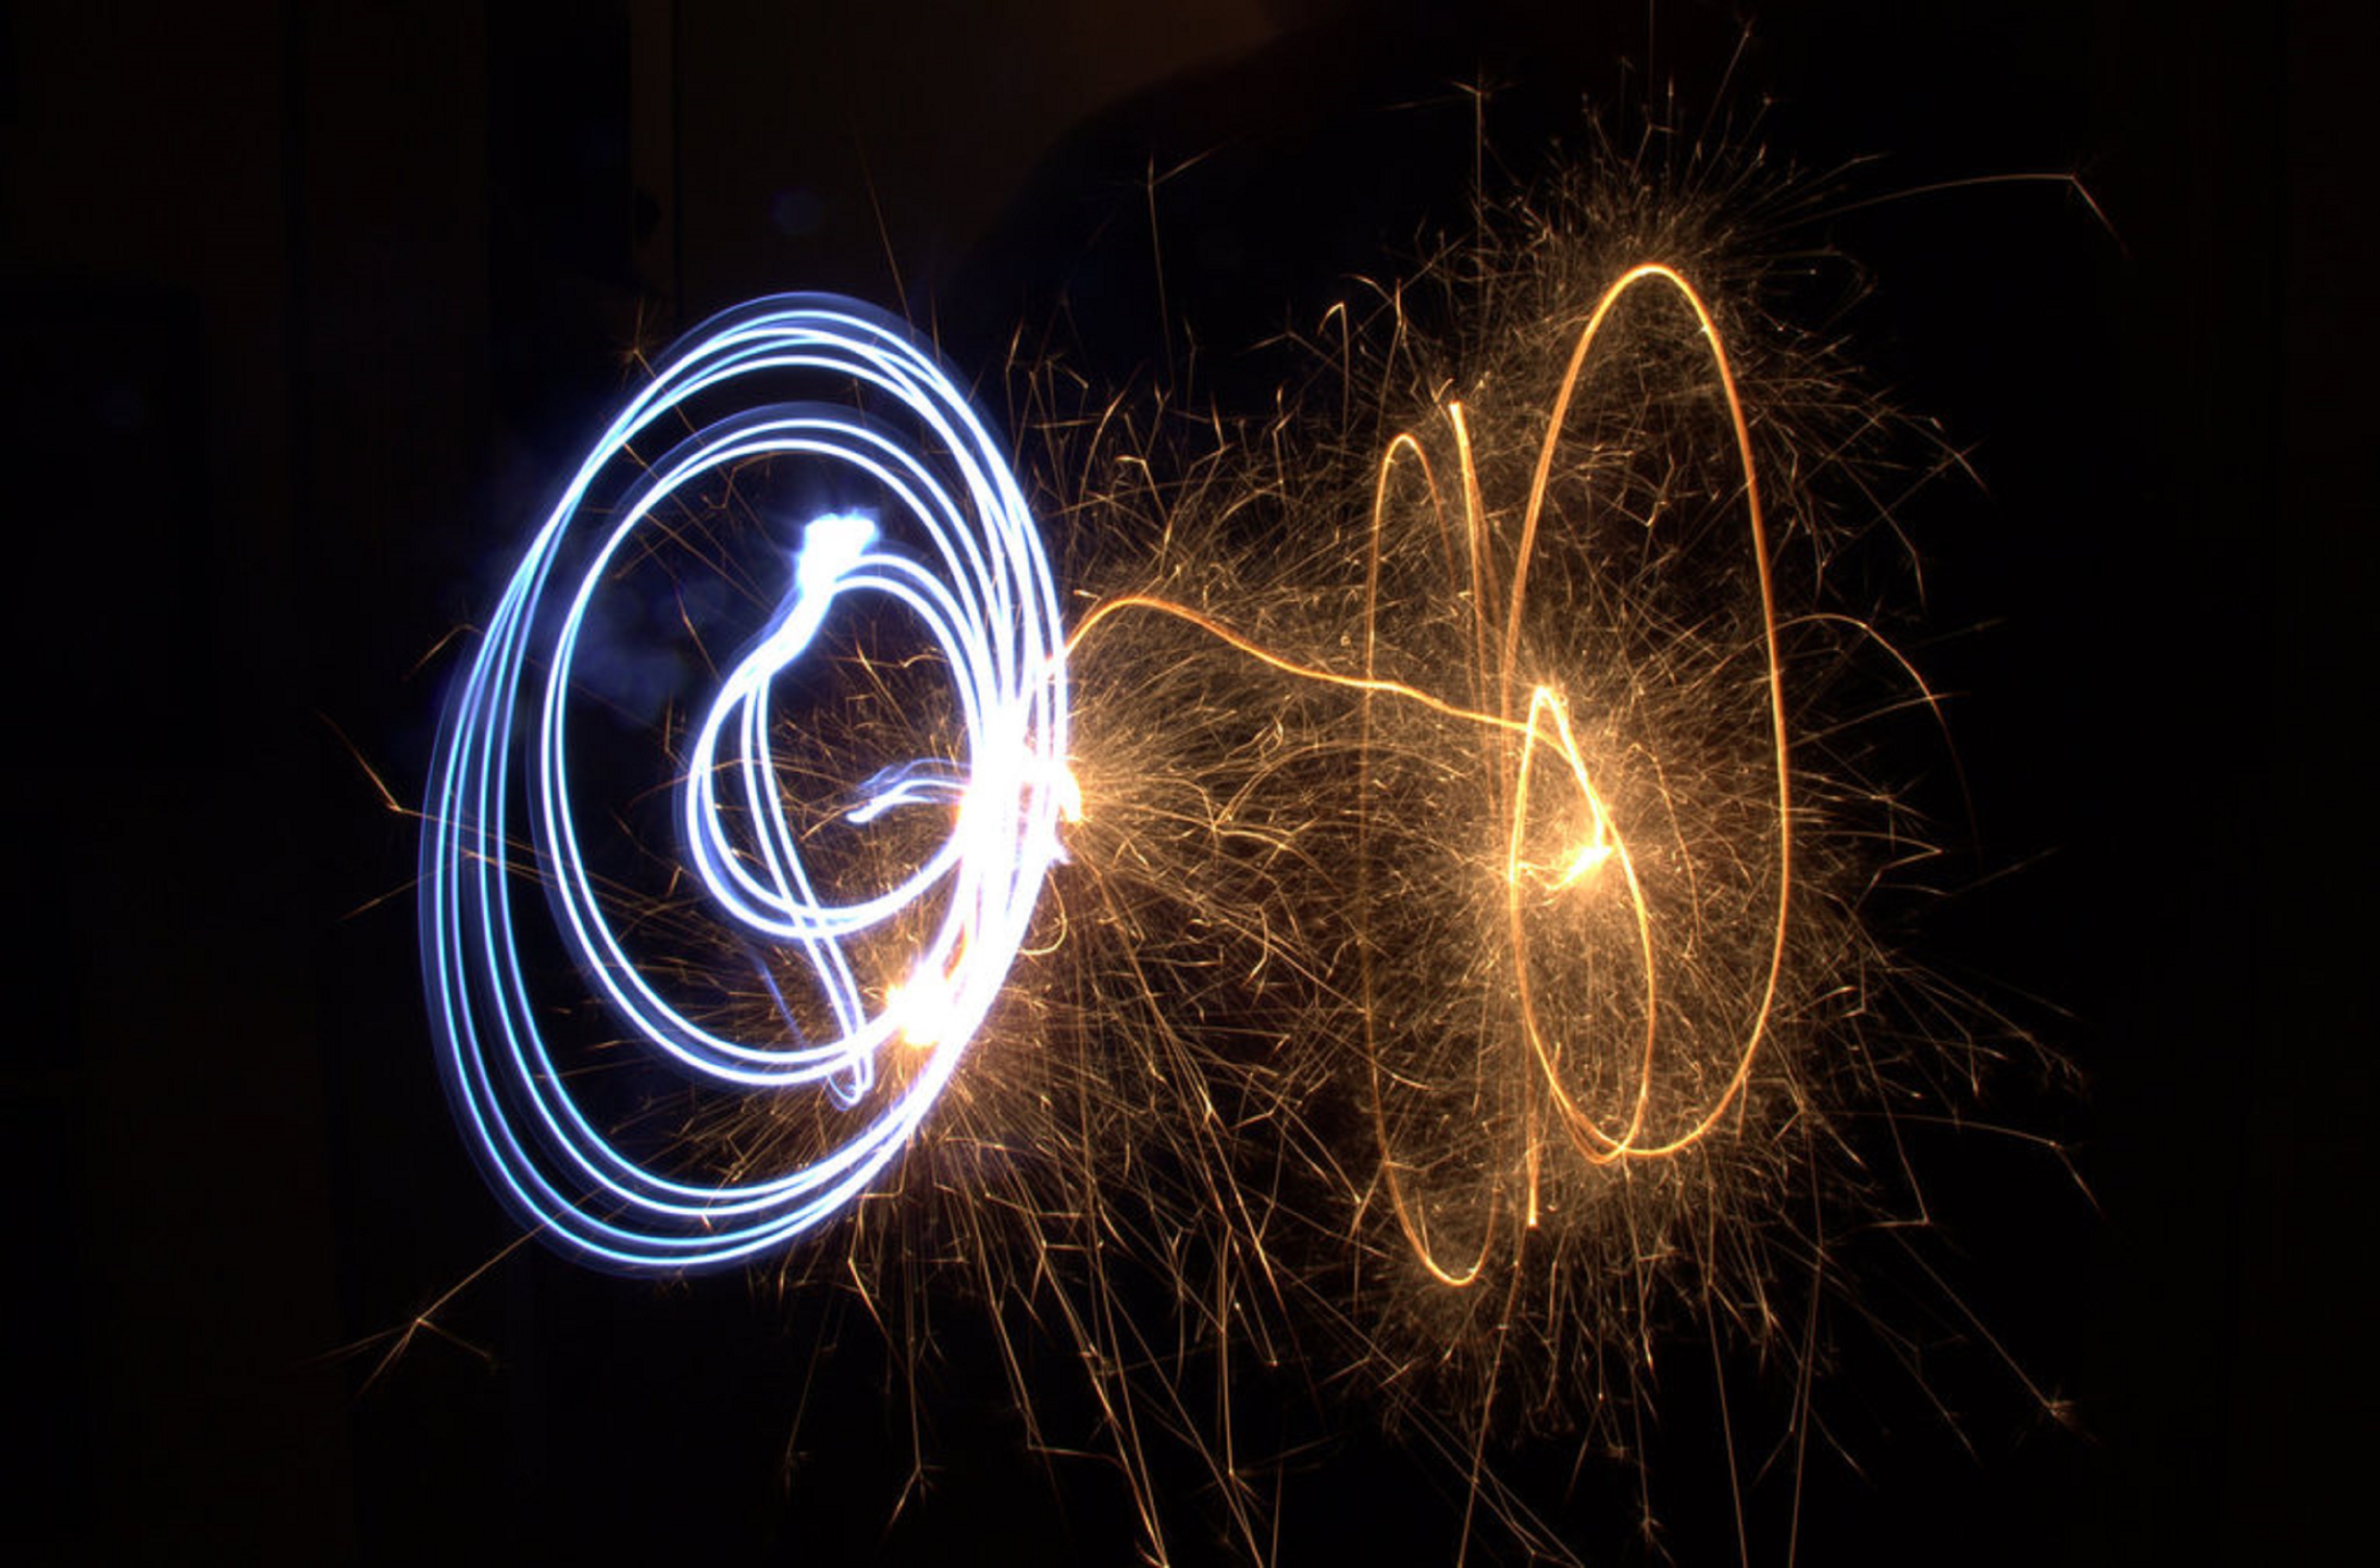 File:Light turning and fireworks in hand.jpg - Wikimedia Commons